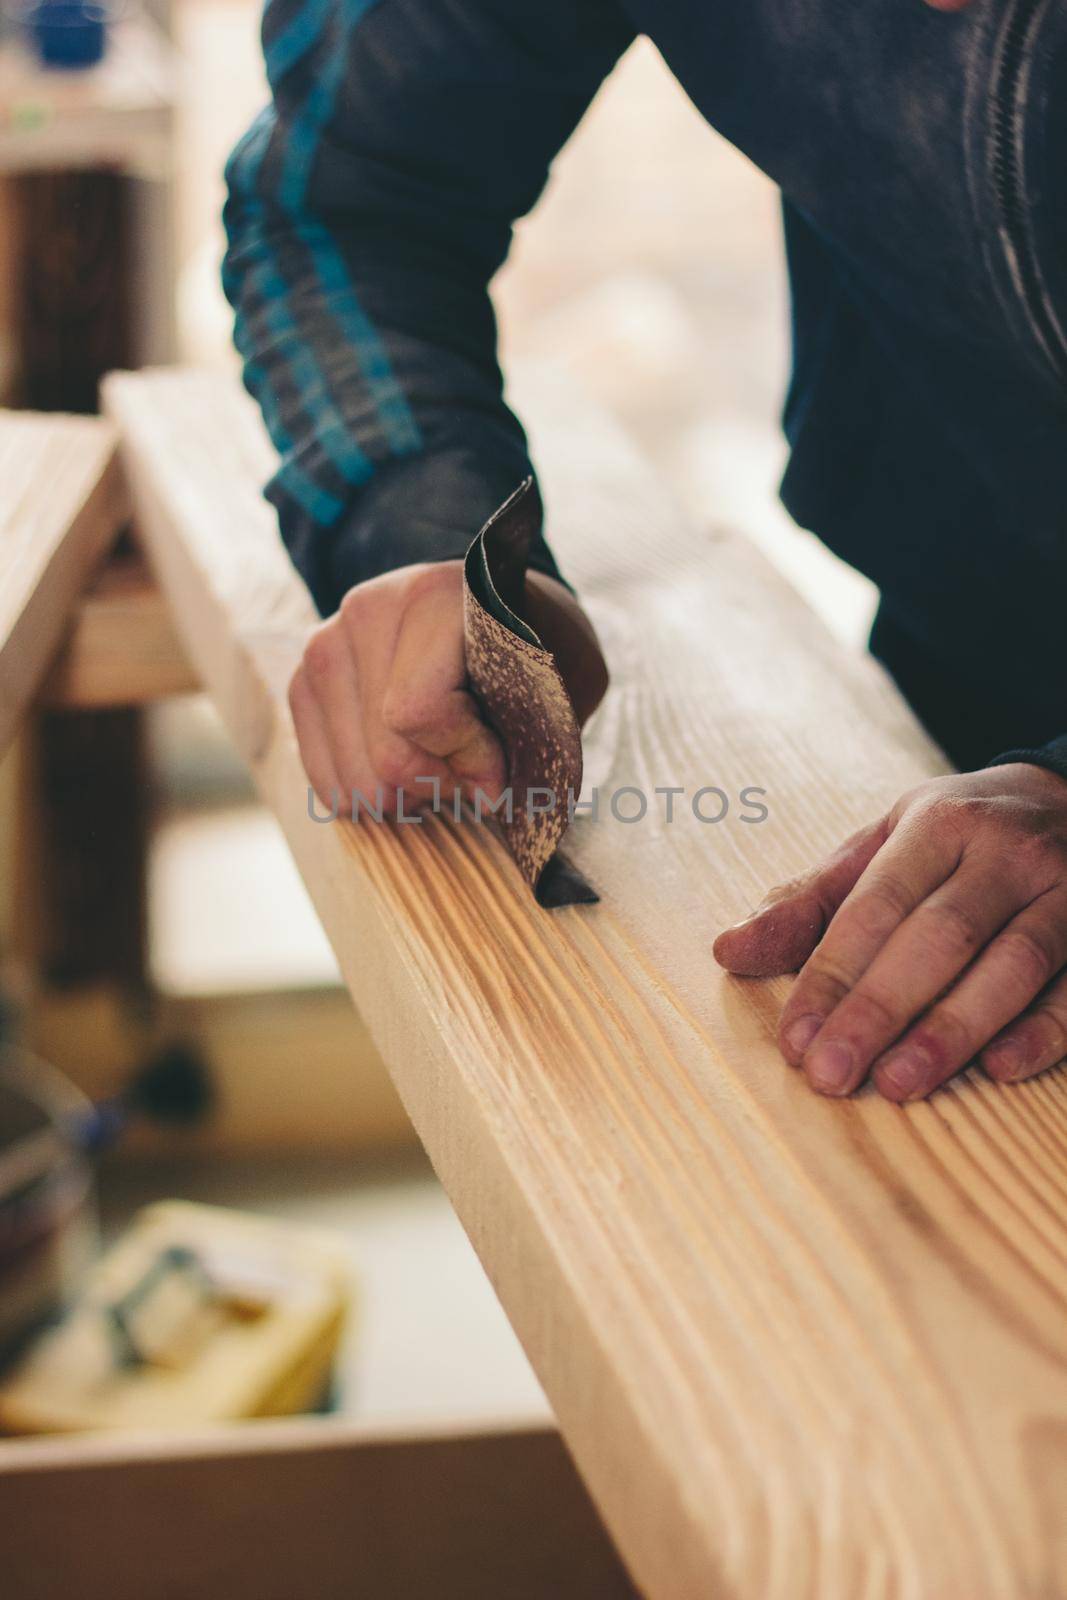 hands with the sandpaper treat the wooden plank. Great photo for your needs.